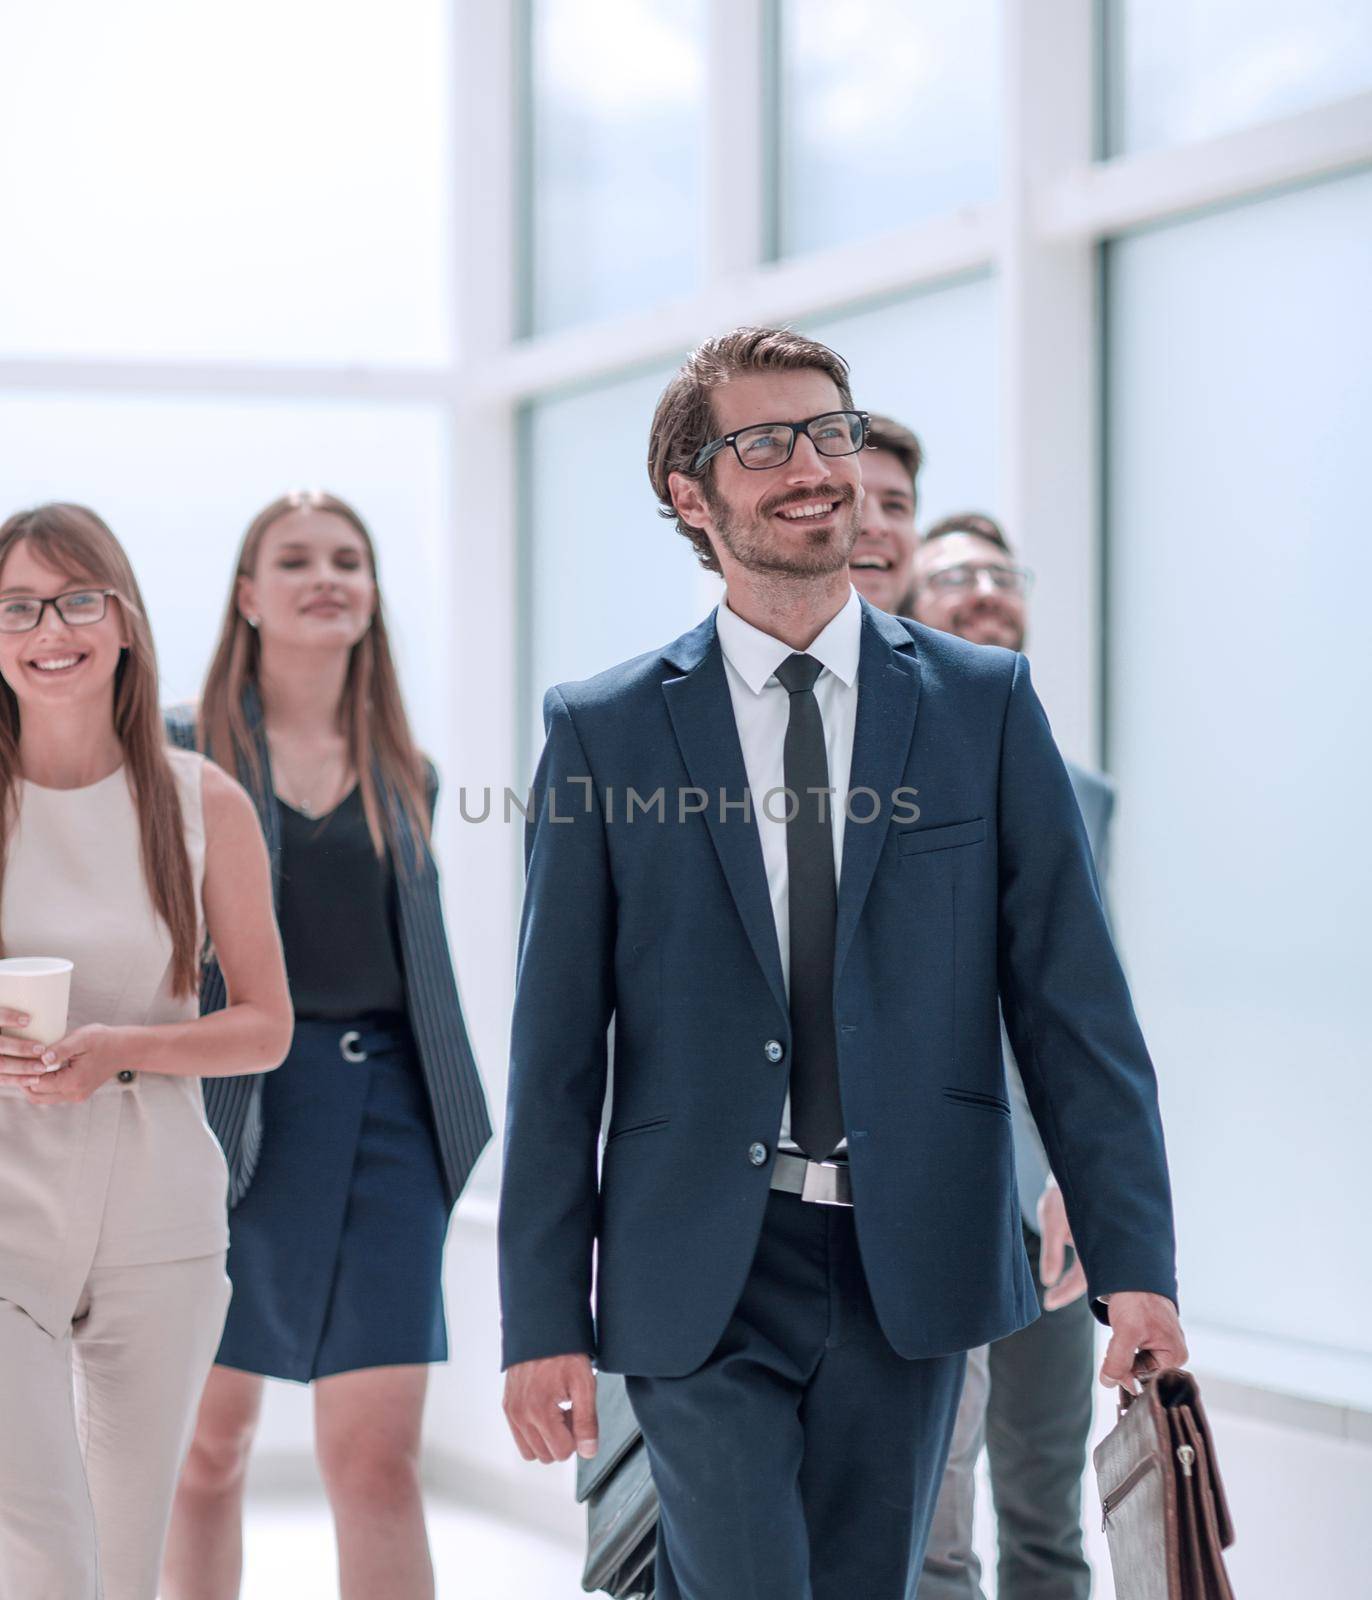 businessman walking in front of his business team . business concept